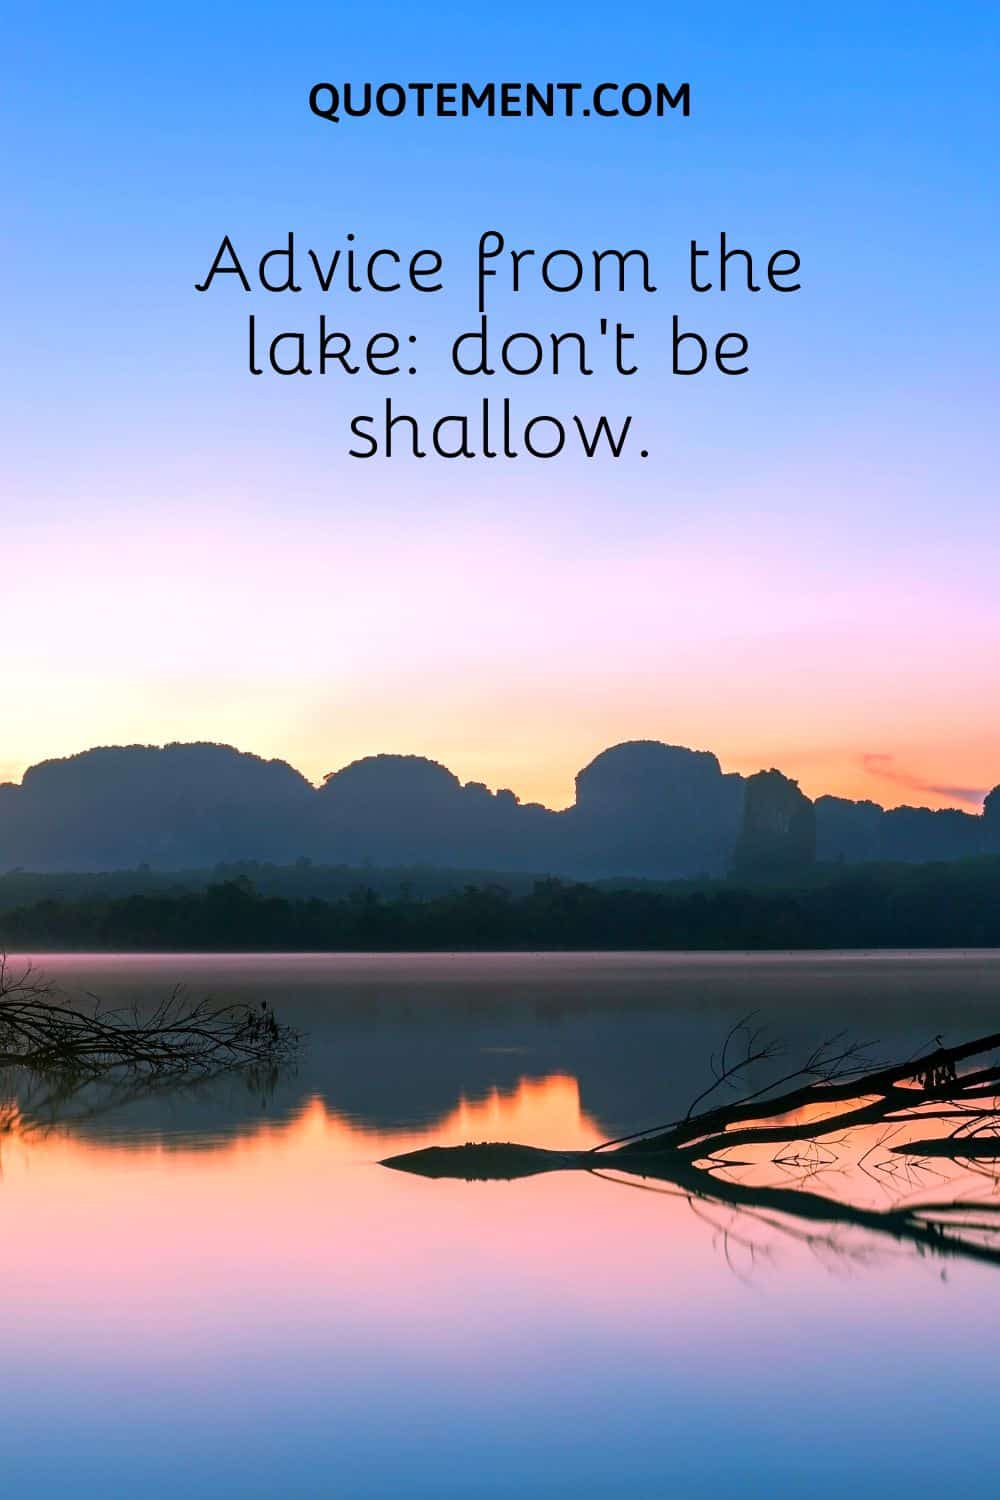 Advice from the lake don’t be shallow.